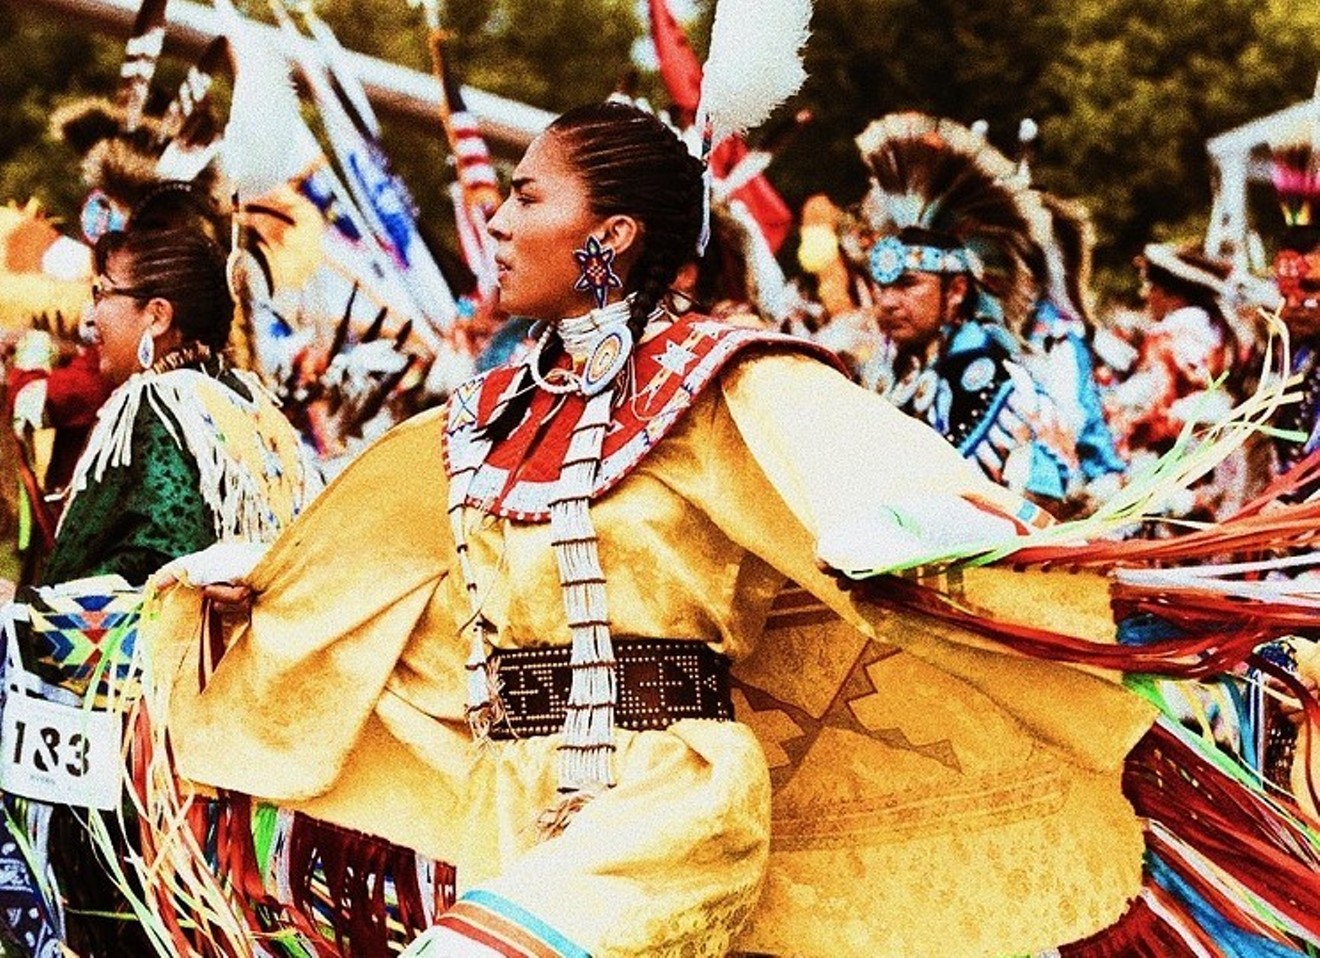 Fancy shawl dancing and classical ballet will come together at the Denver March Powwow.